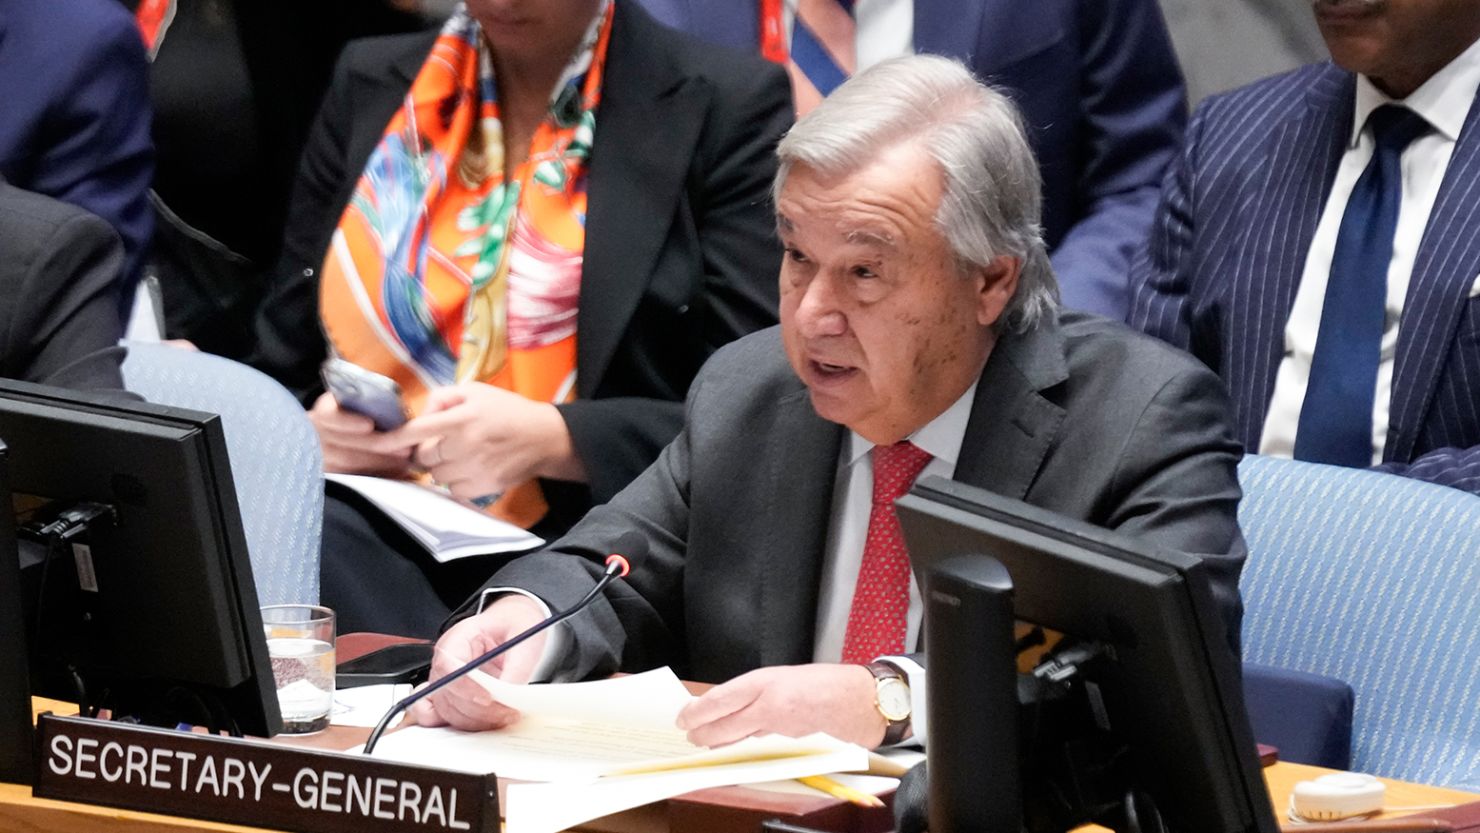 Guterres told the UN's Security Council that Hamas' attacks "cannot justify the collective punishment of the Palestinian people."